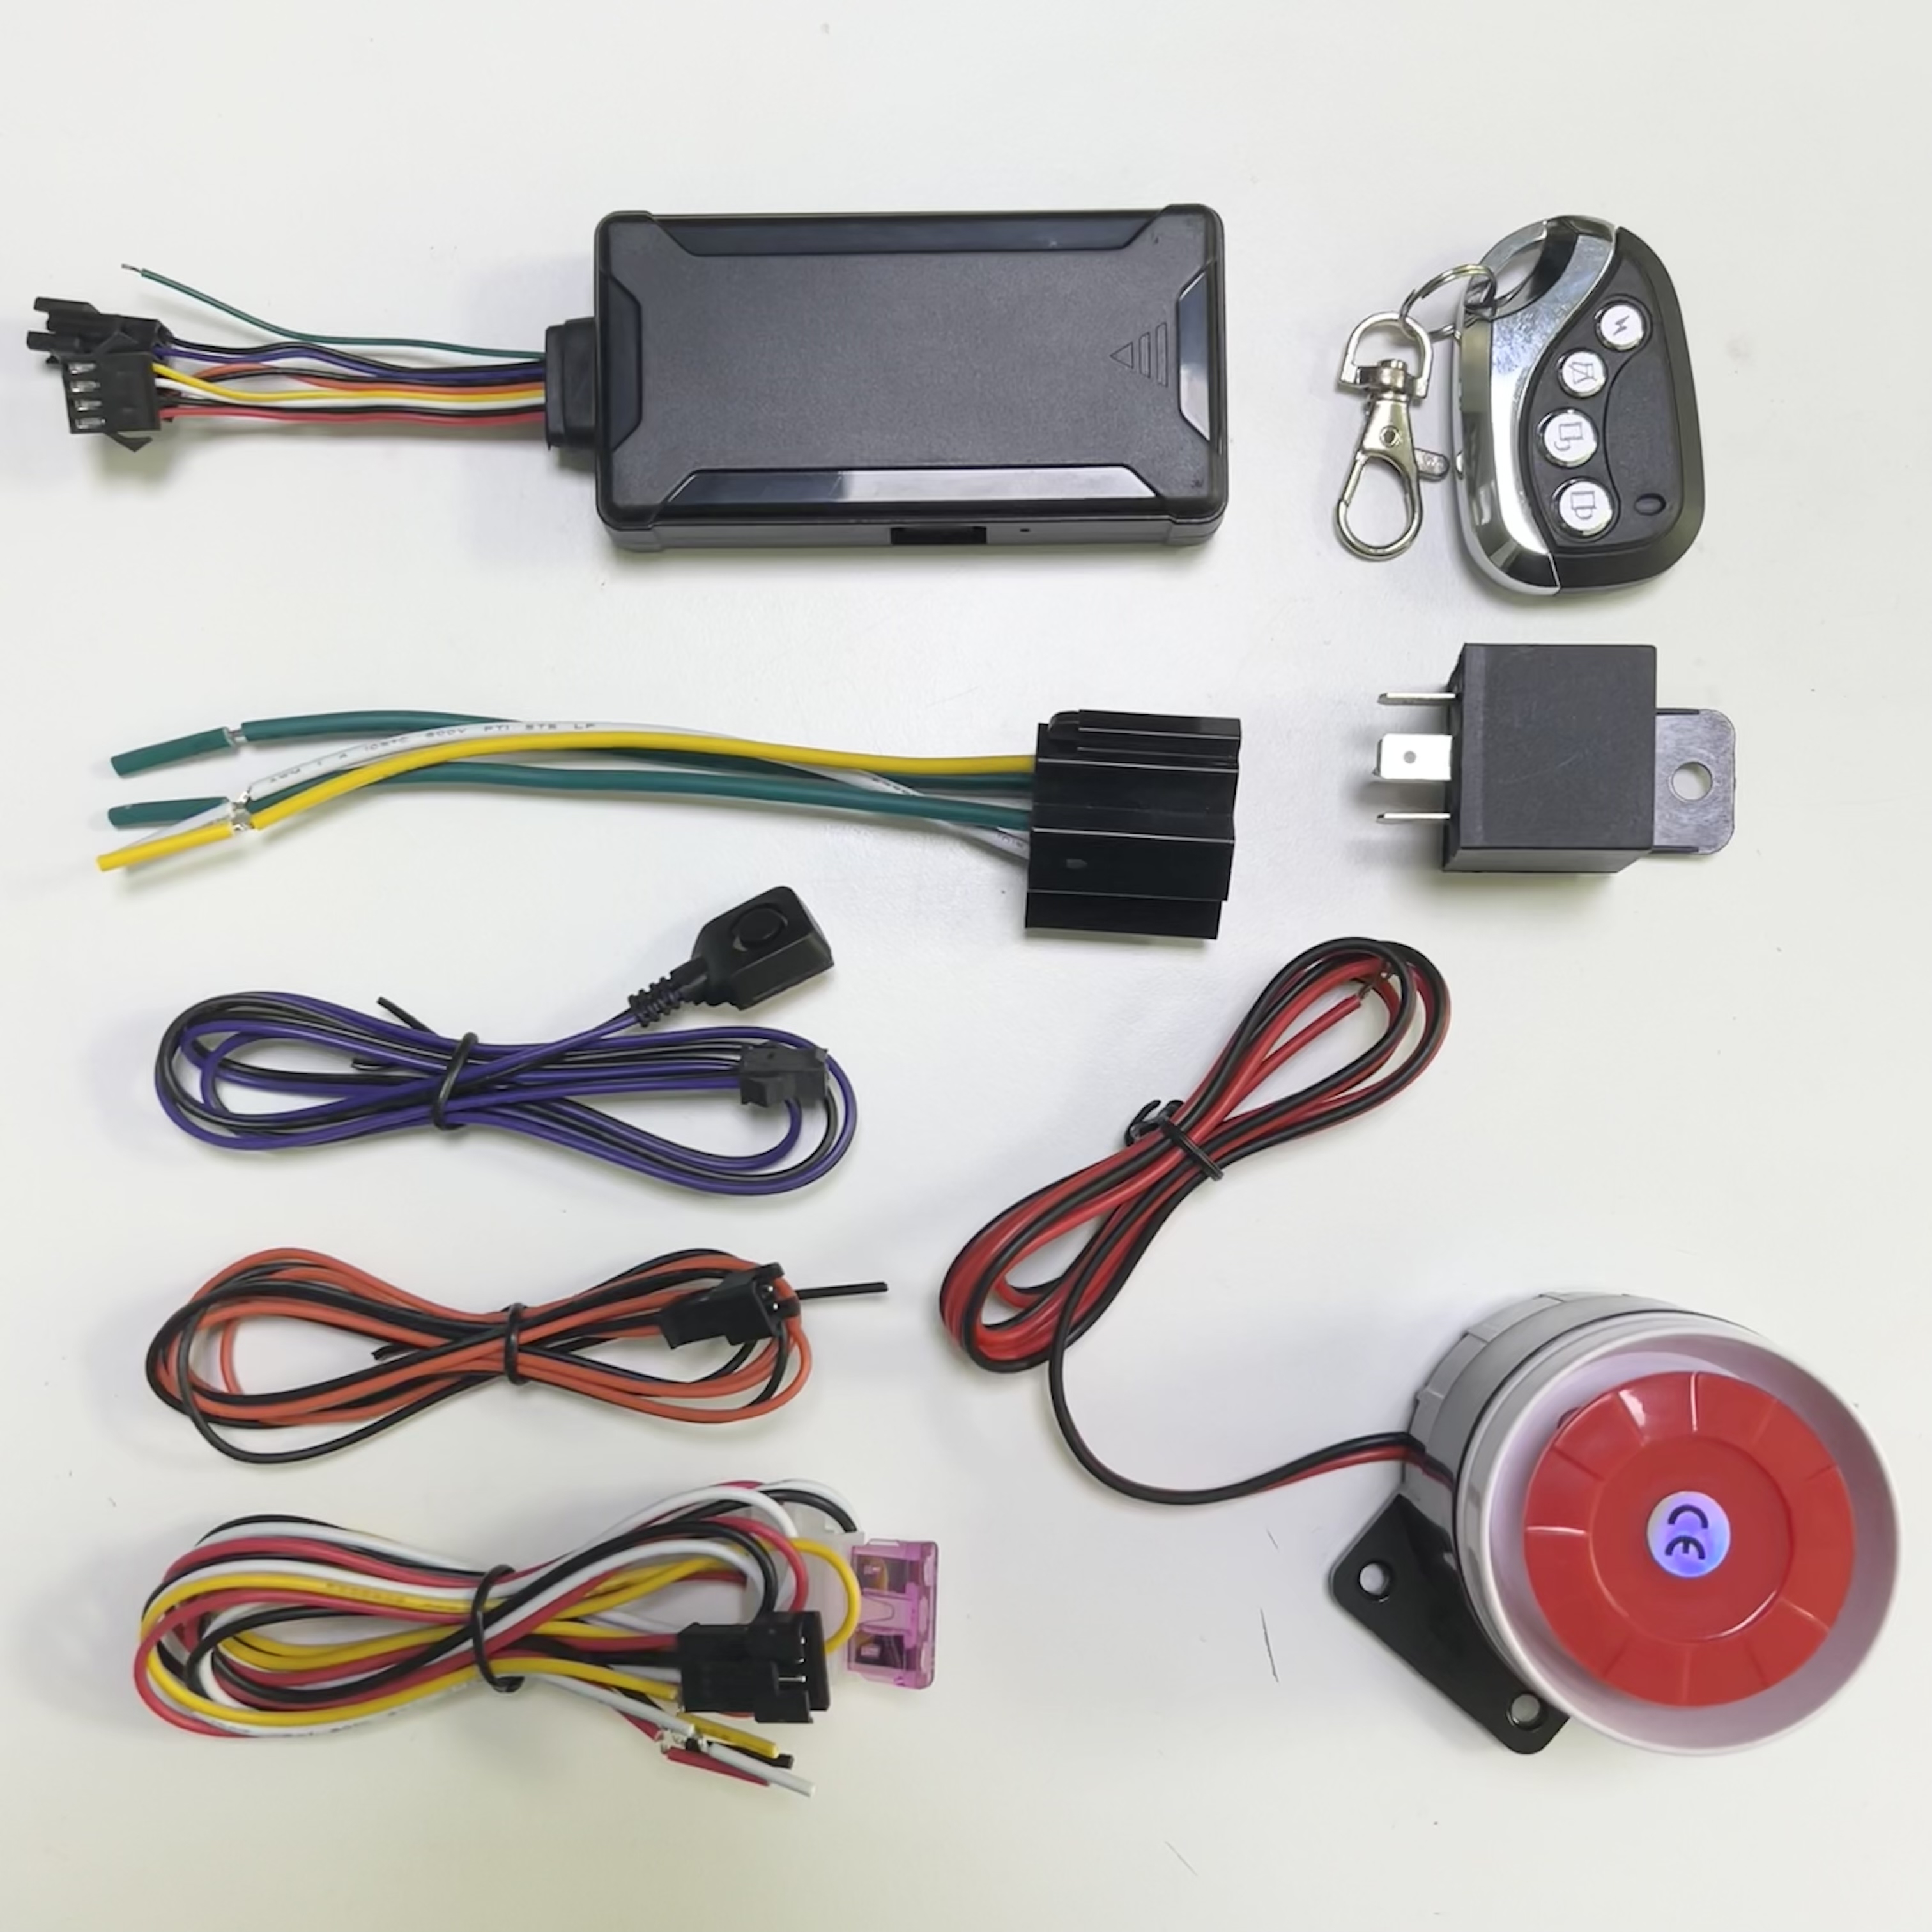 4G GPS Tracker for vehicles supplier